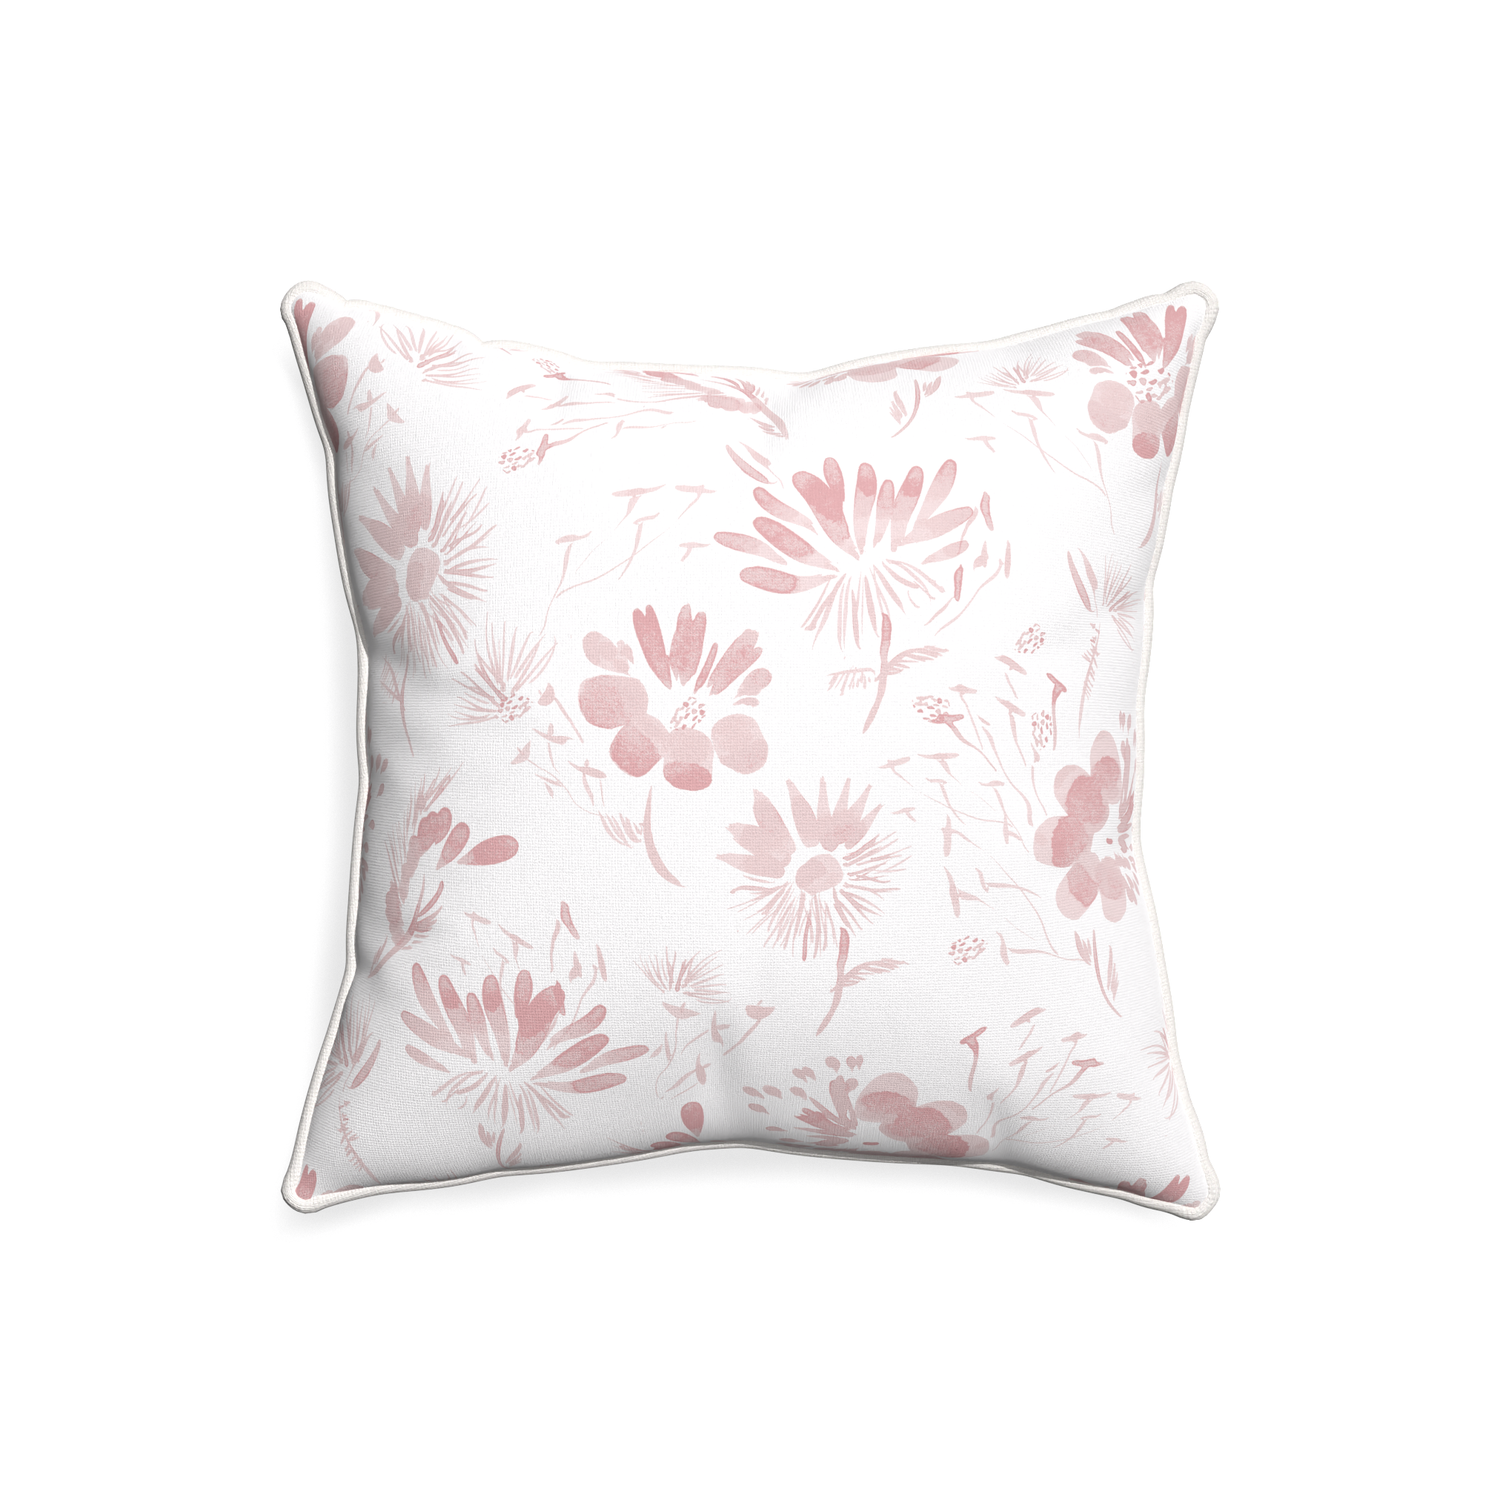 20-square blake custom pillow with snow piping on white background